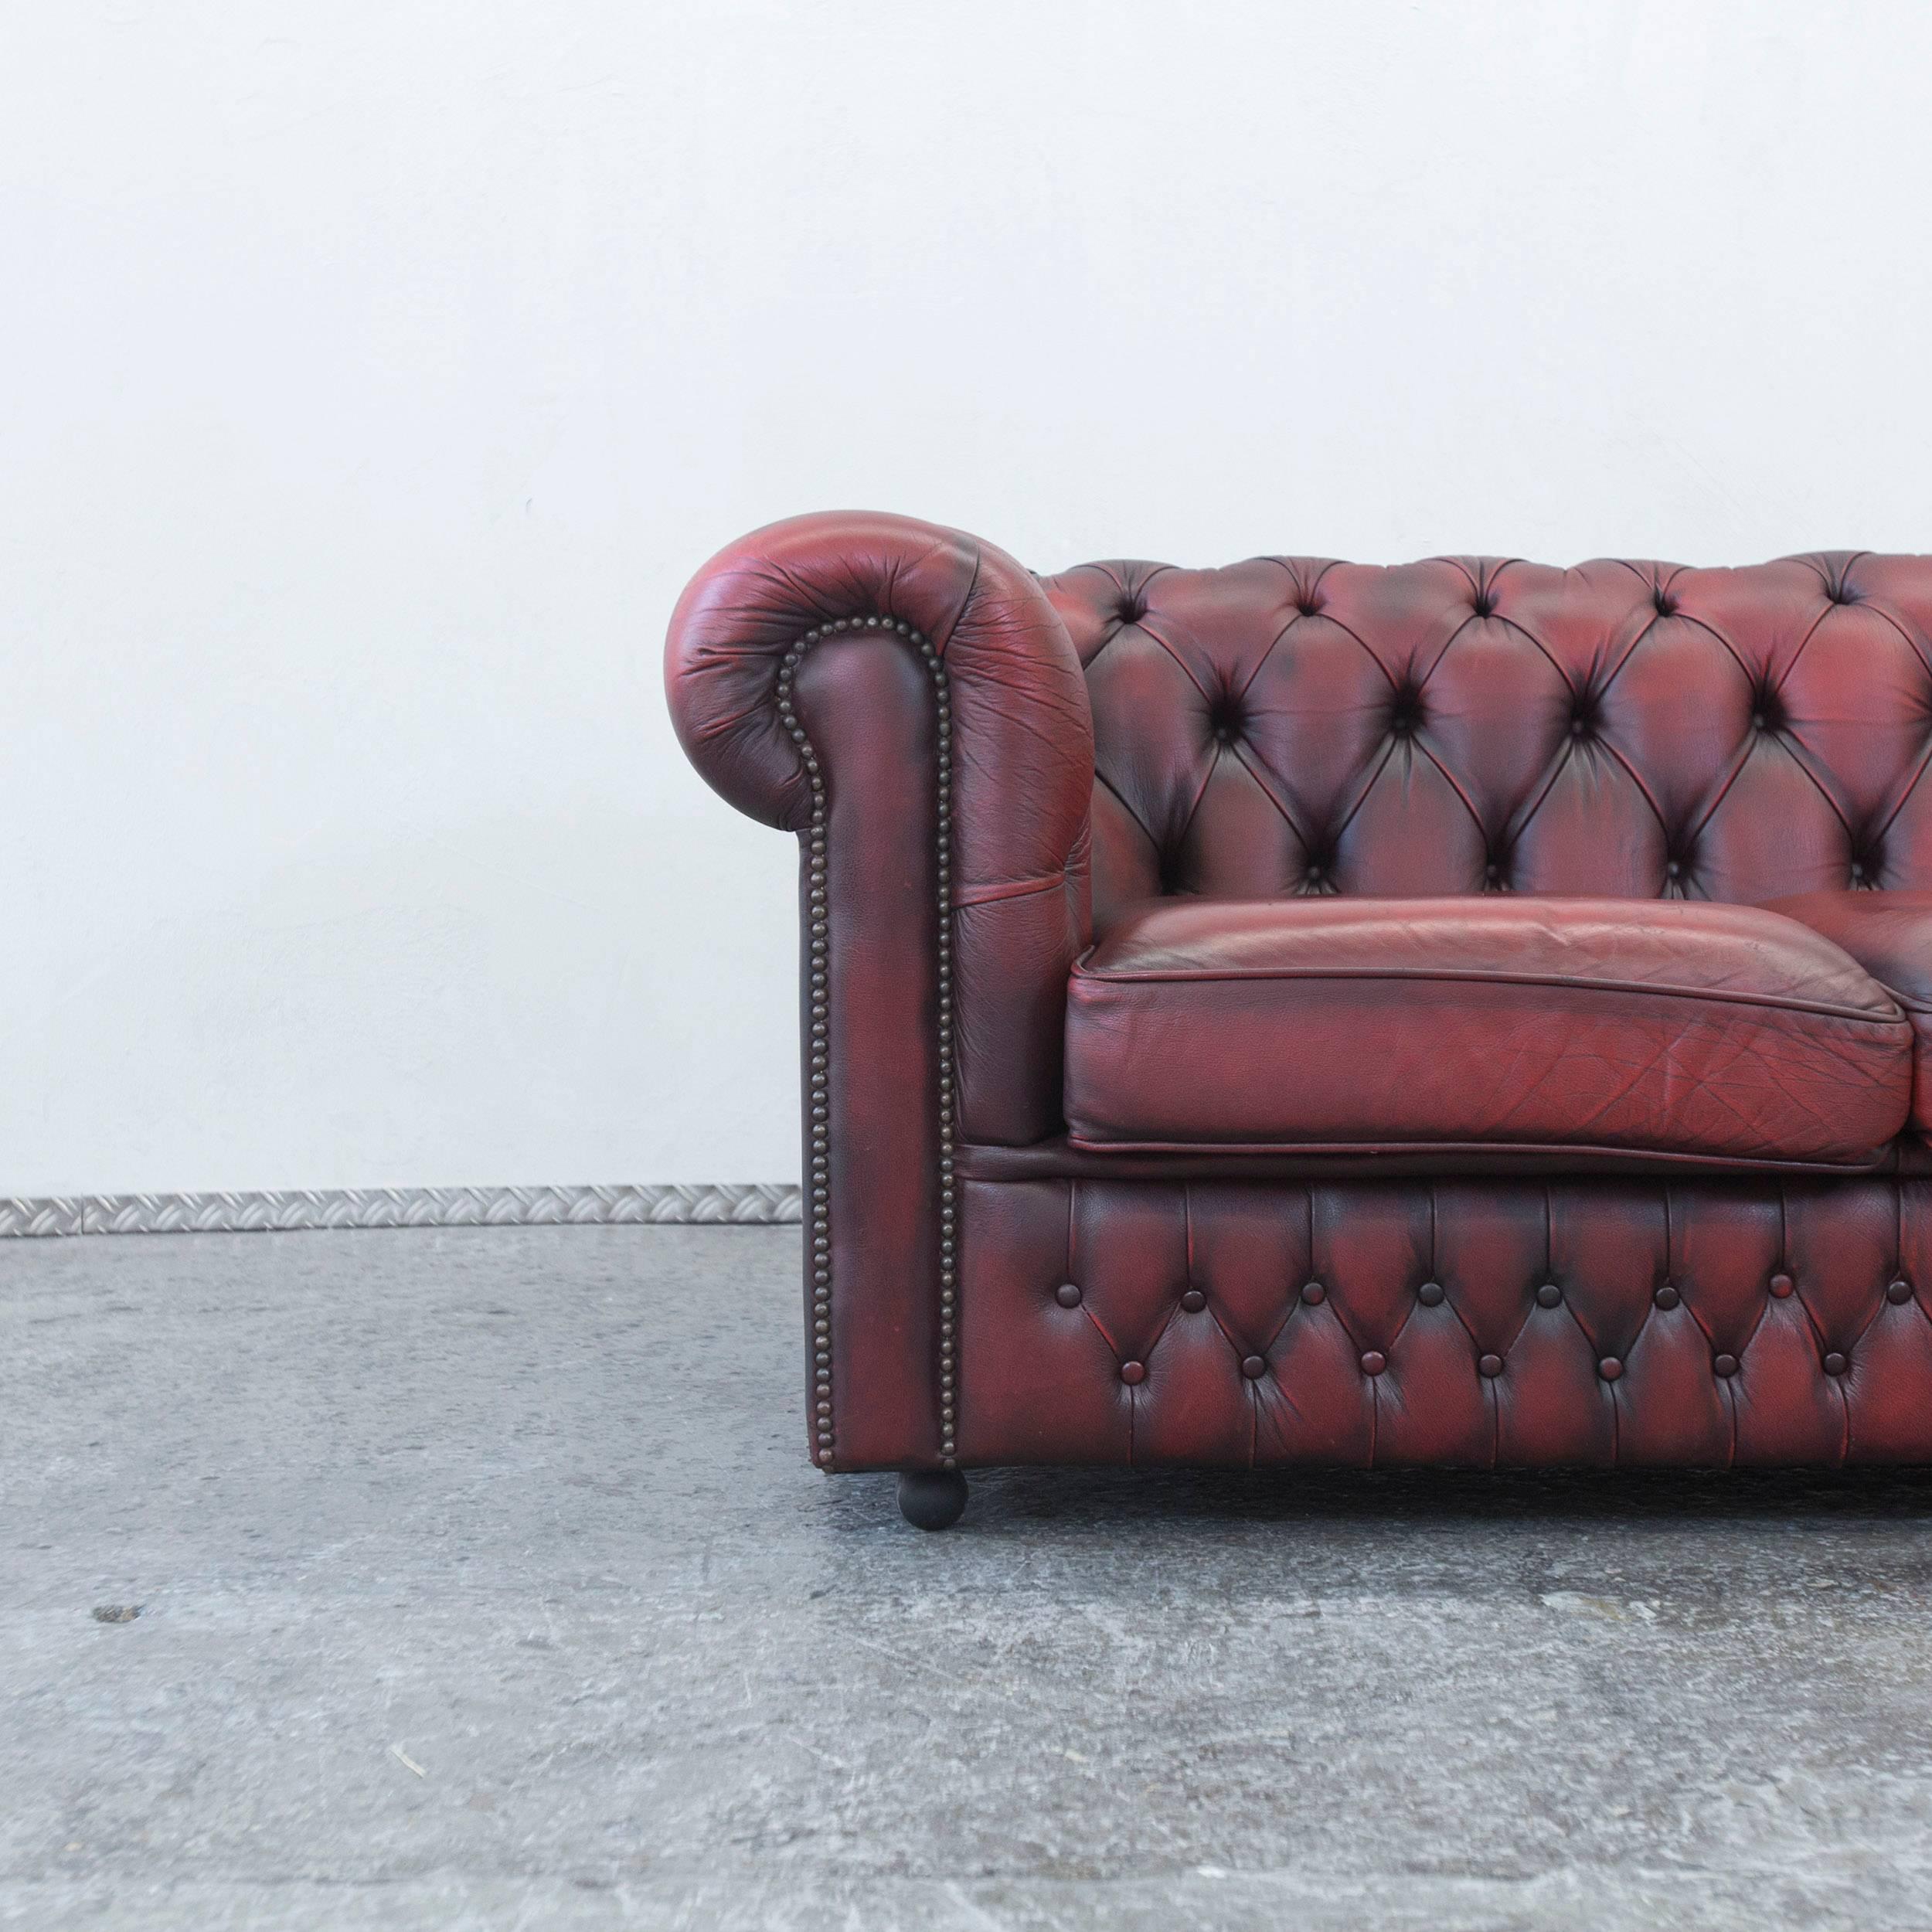 Oxblood red colored Chesterfield leather sofa in a vintage style, designed for pure comfort and elegance.